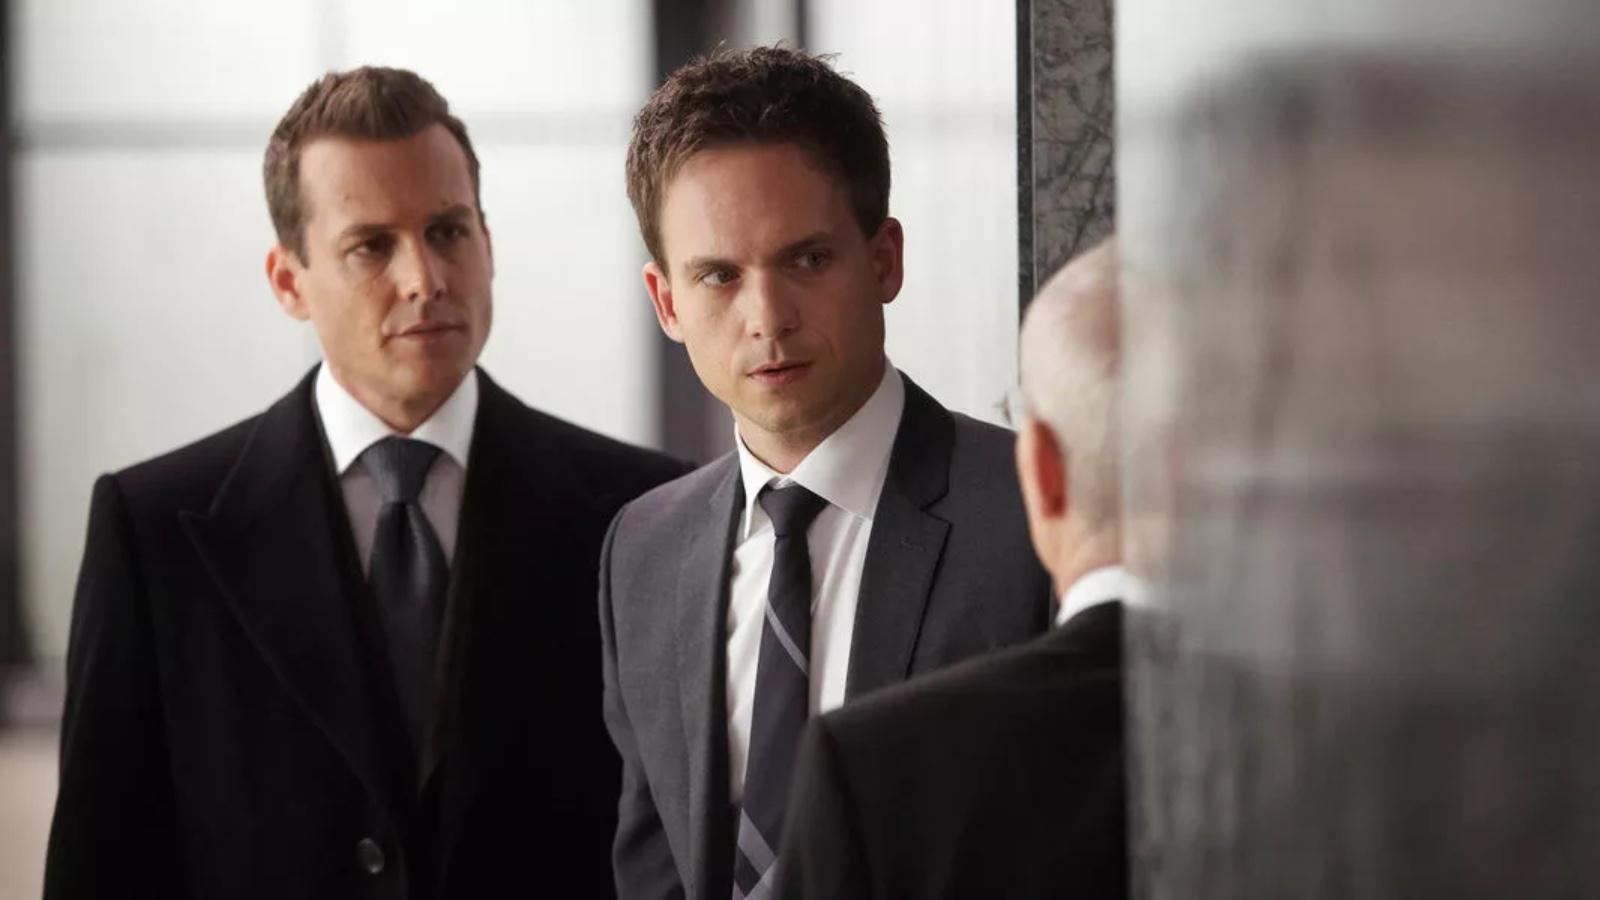 Suits characters in Season 3 Episode 16